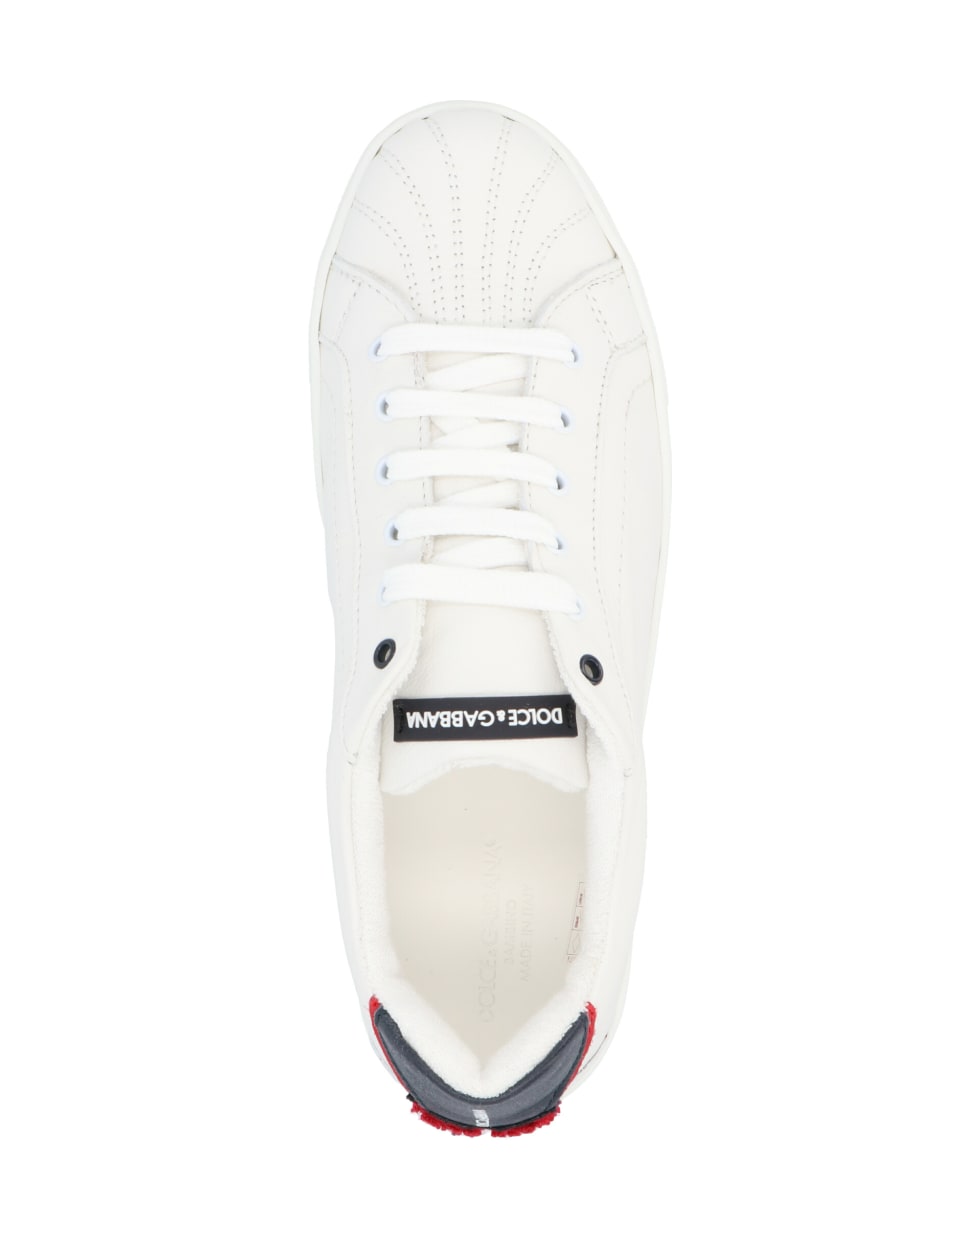 Dolce & Gabbana 'back To School' Shoes - White